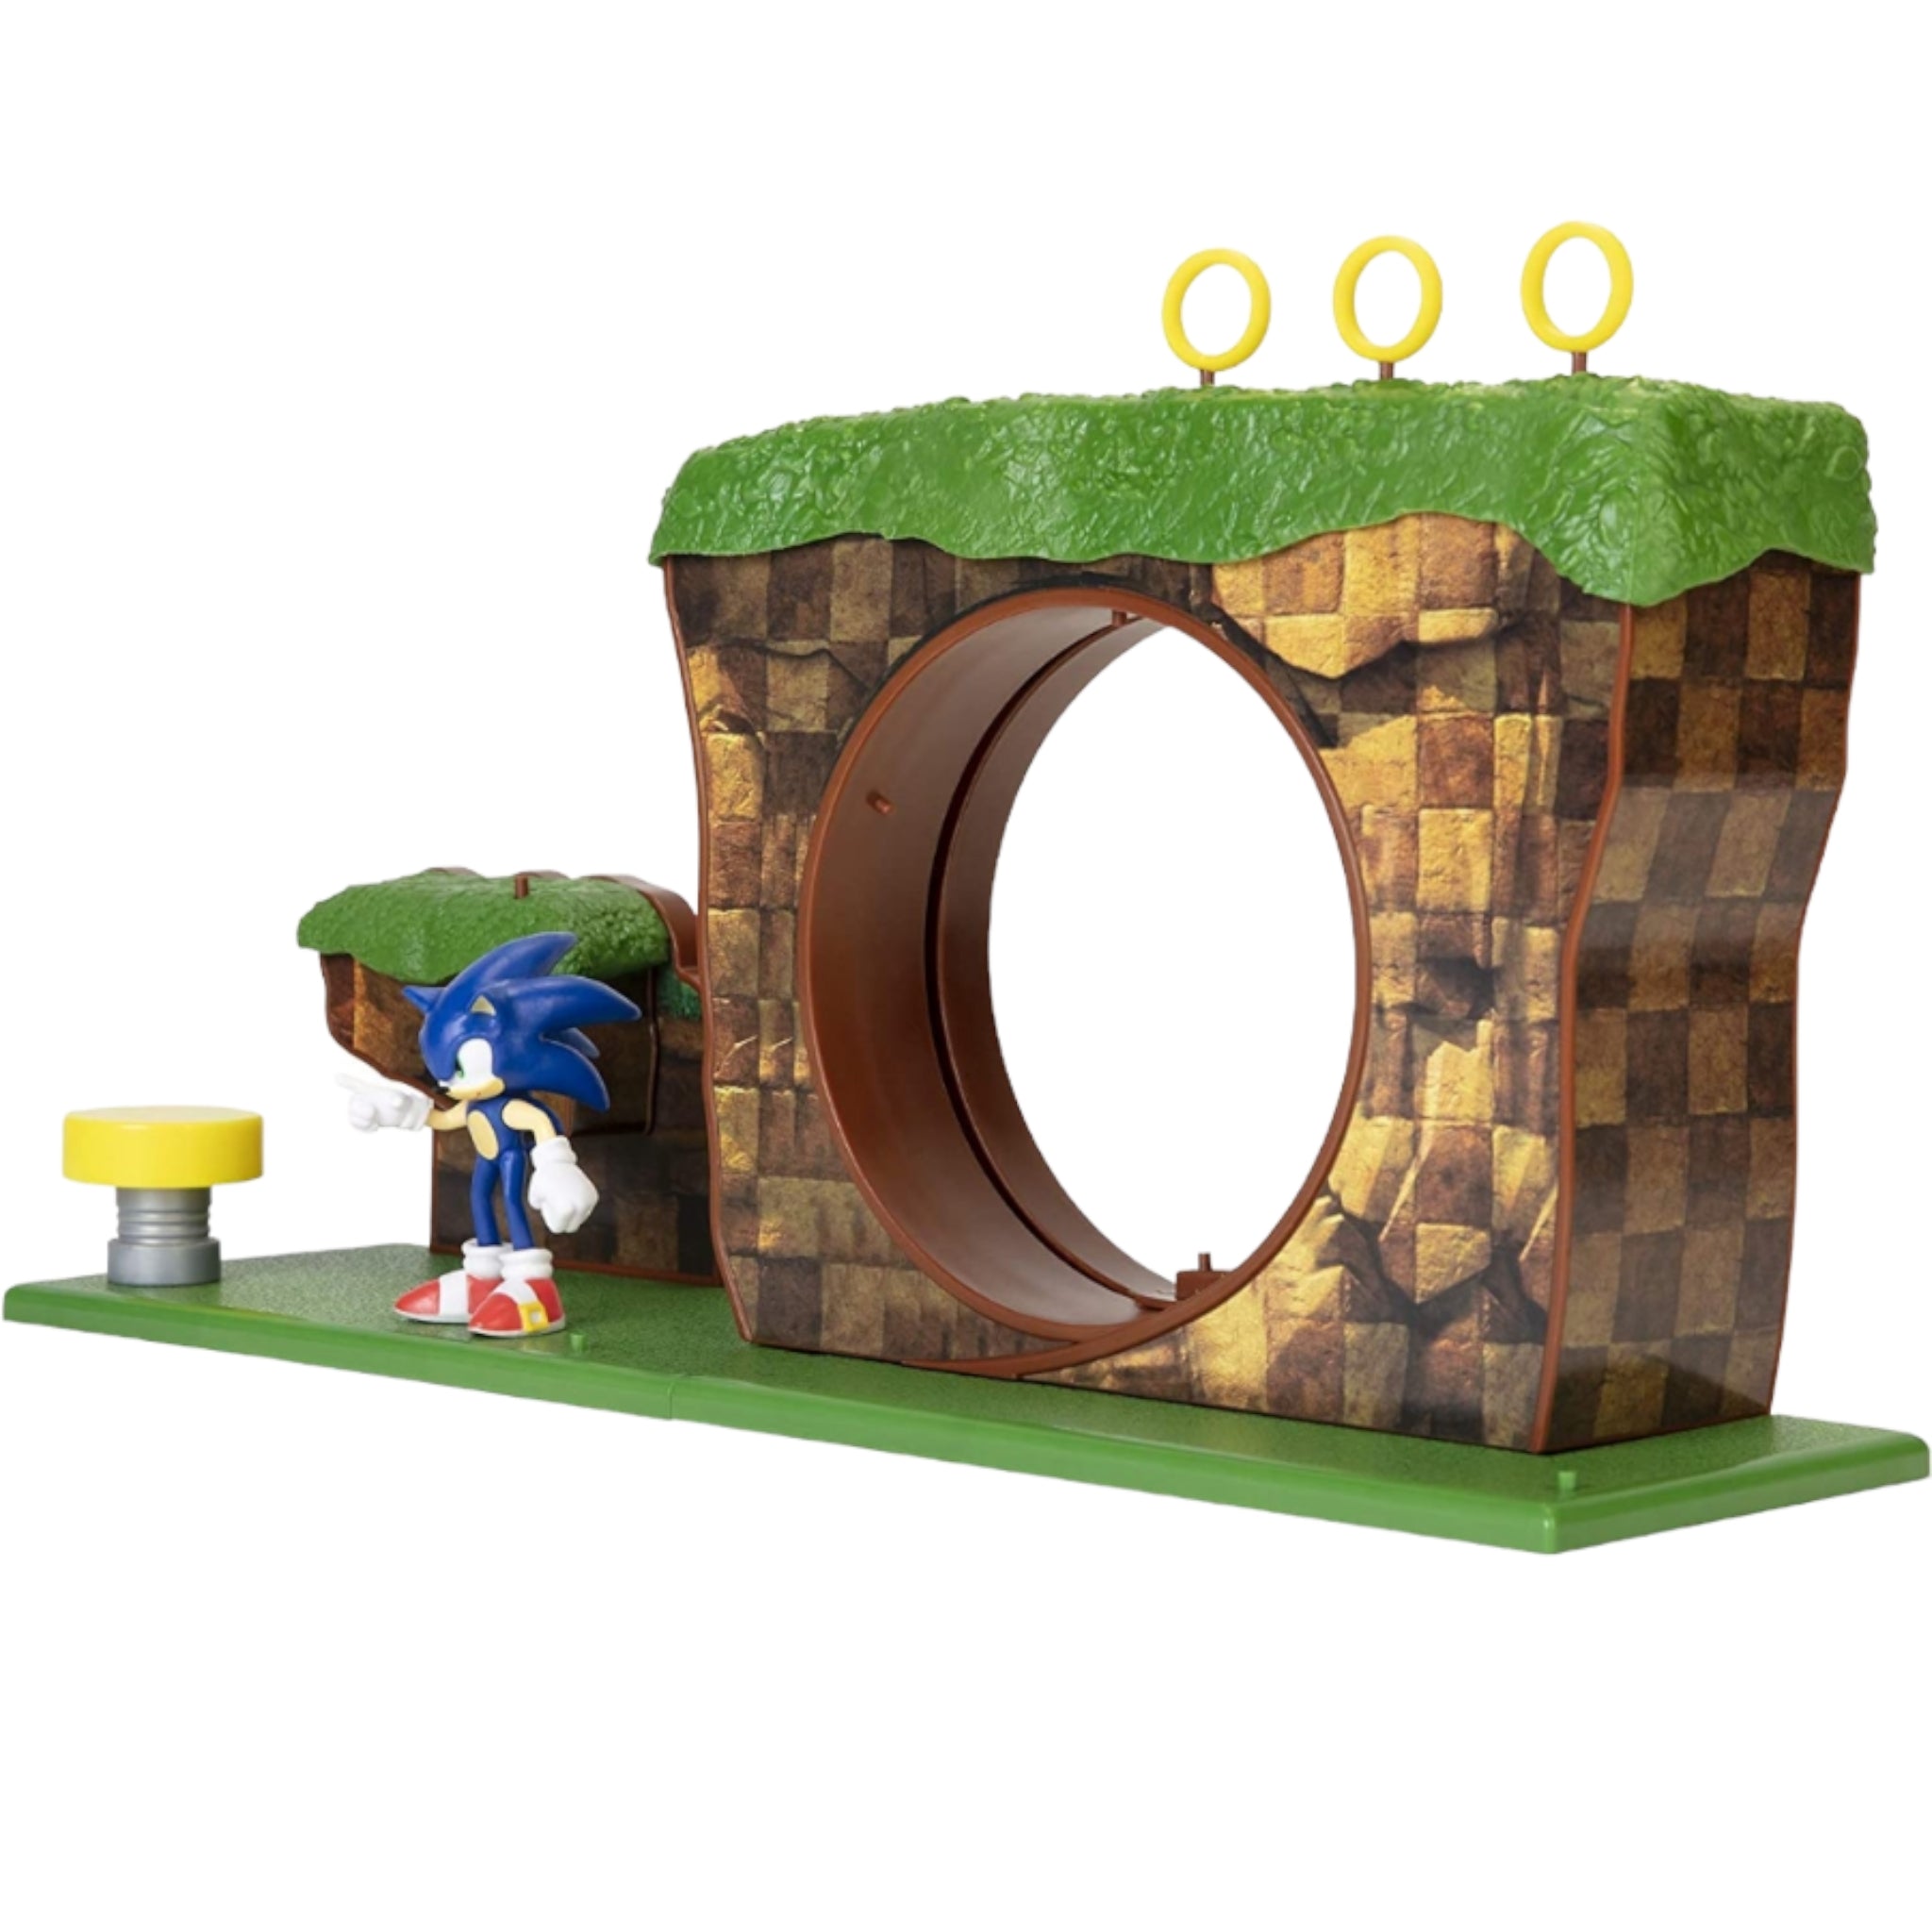 Green Hill Zone from different sonic games : r/SonicTheHedgehog